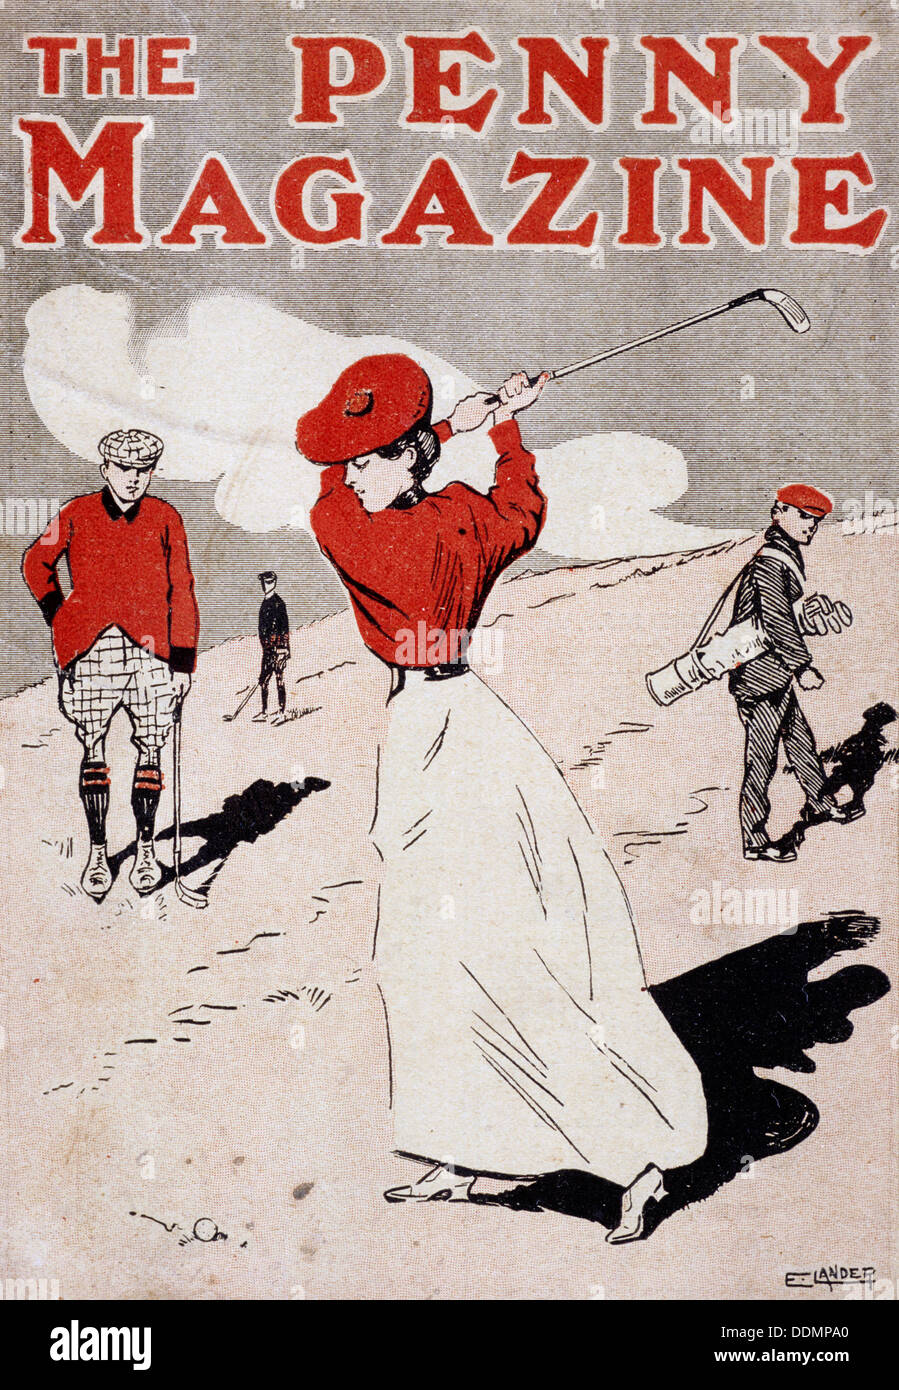 Lady golfer taking a swing on the cover of 'The Penny Magazine', c1900. Artist: Unknown Stock Photo